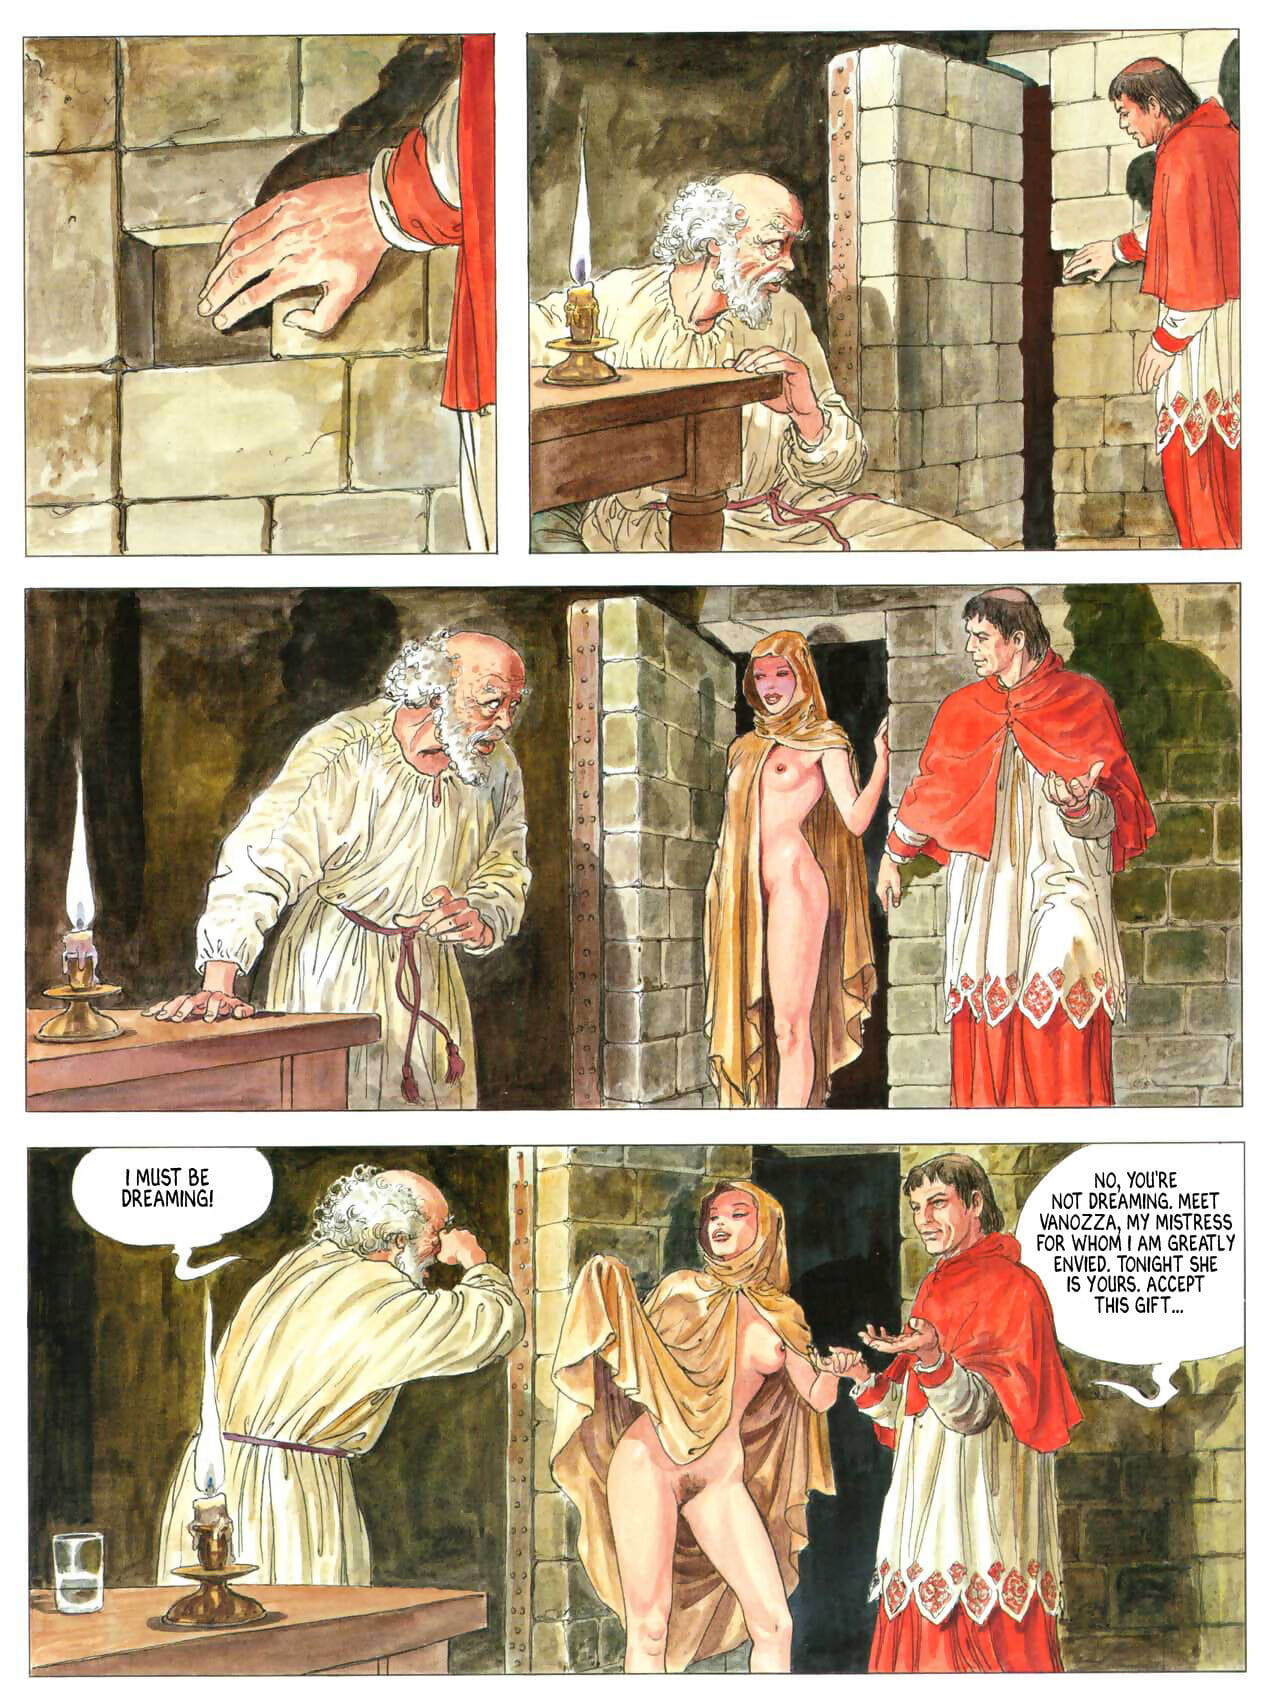 Borgia - Blood for the Pope - part 2 page 1